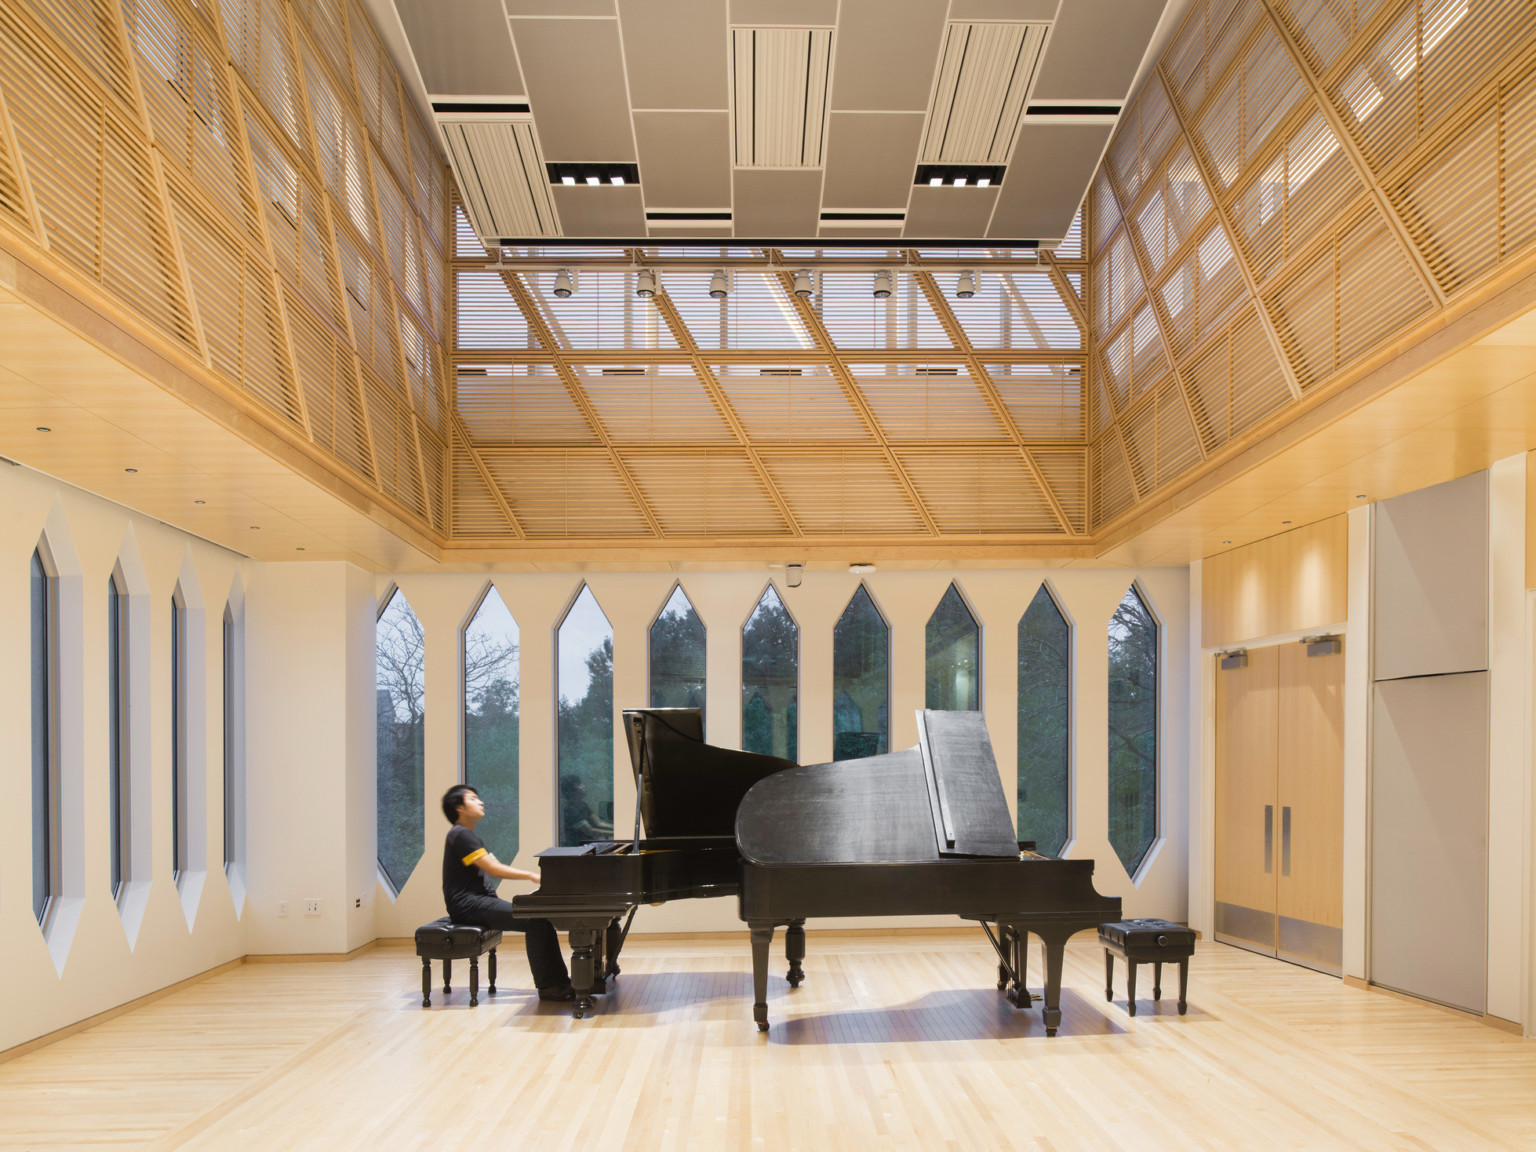 Corner room with white walls and thin rectangular windows with pointed tops and bottoms. A piano, center, on light wood floor